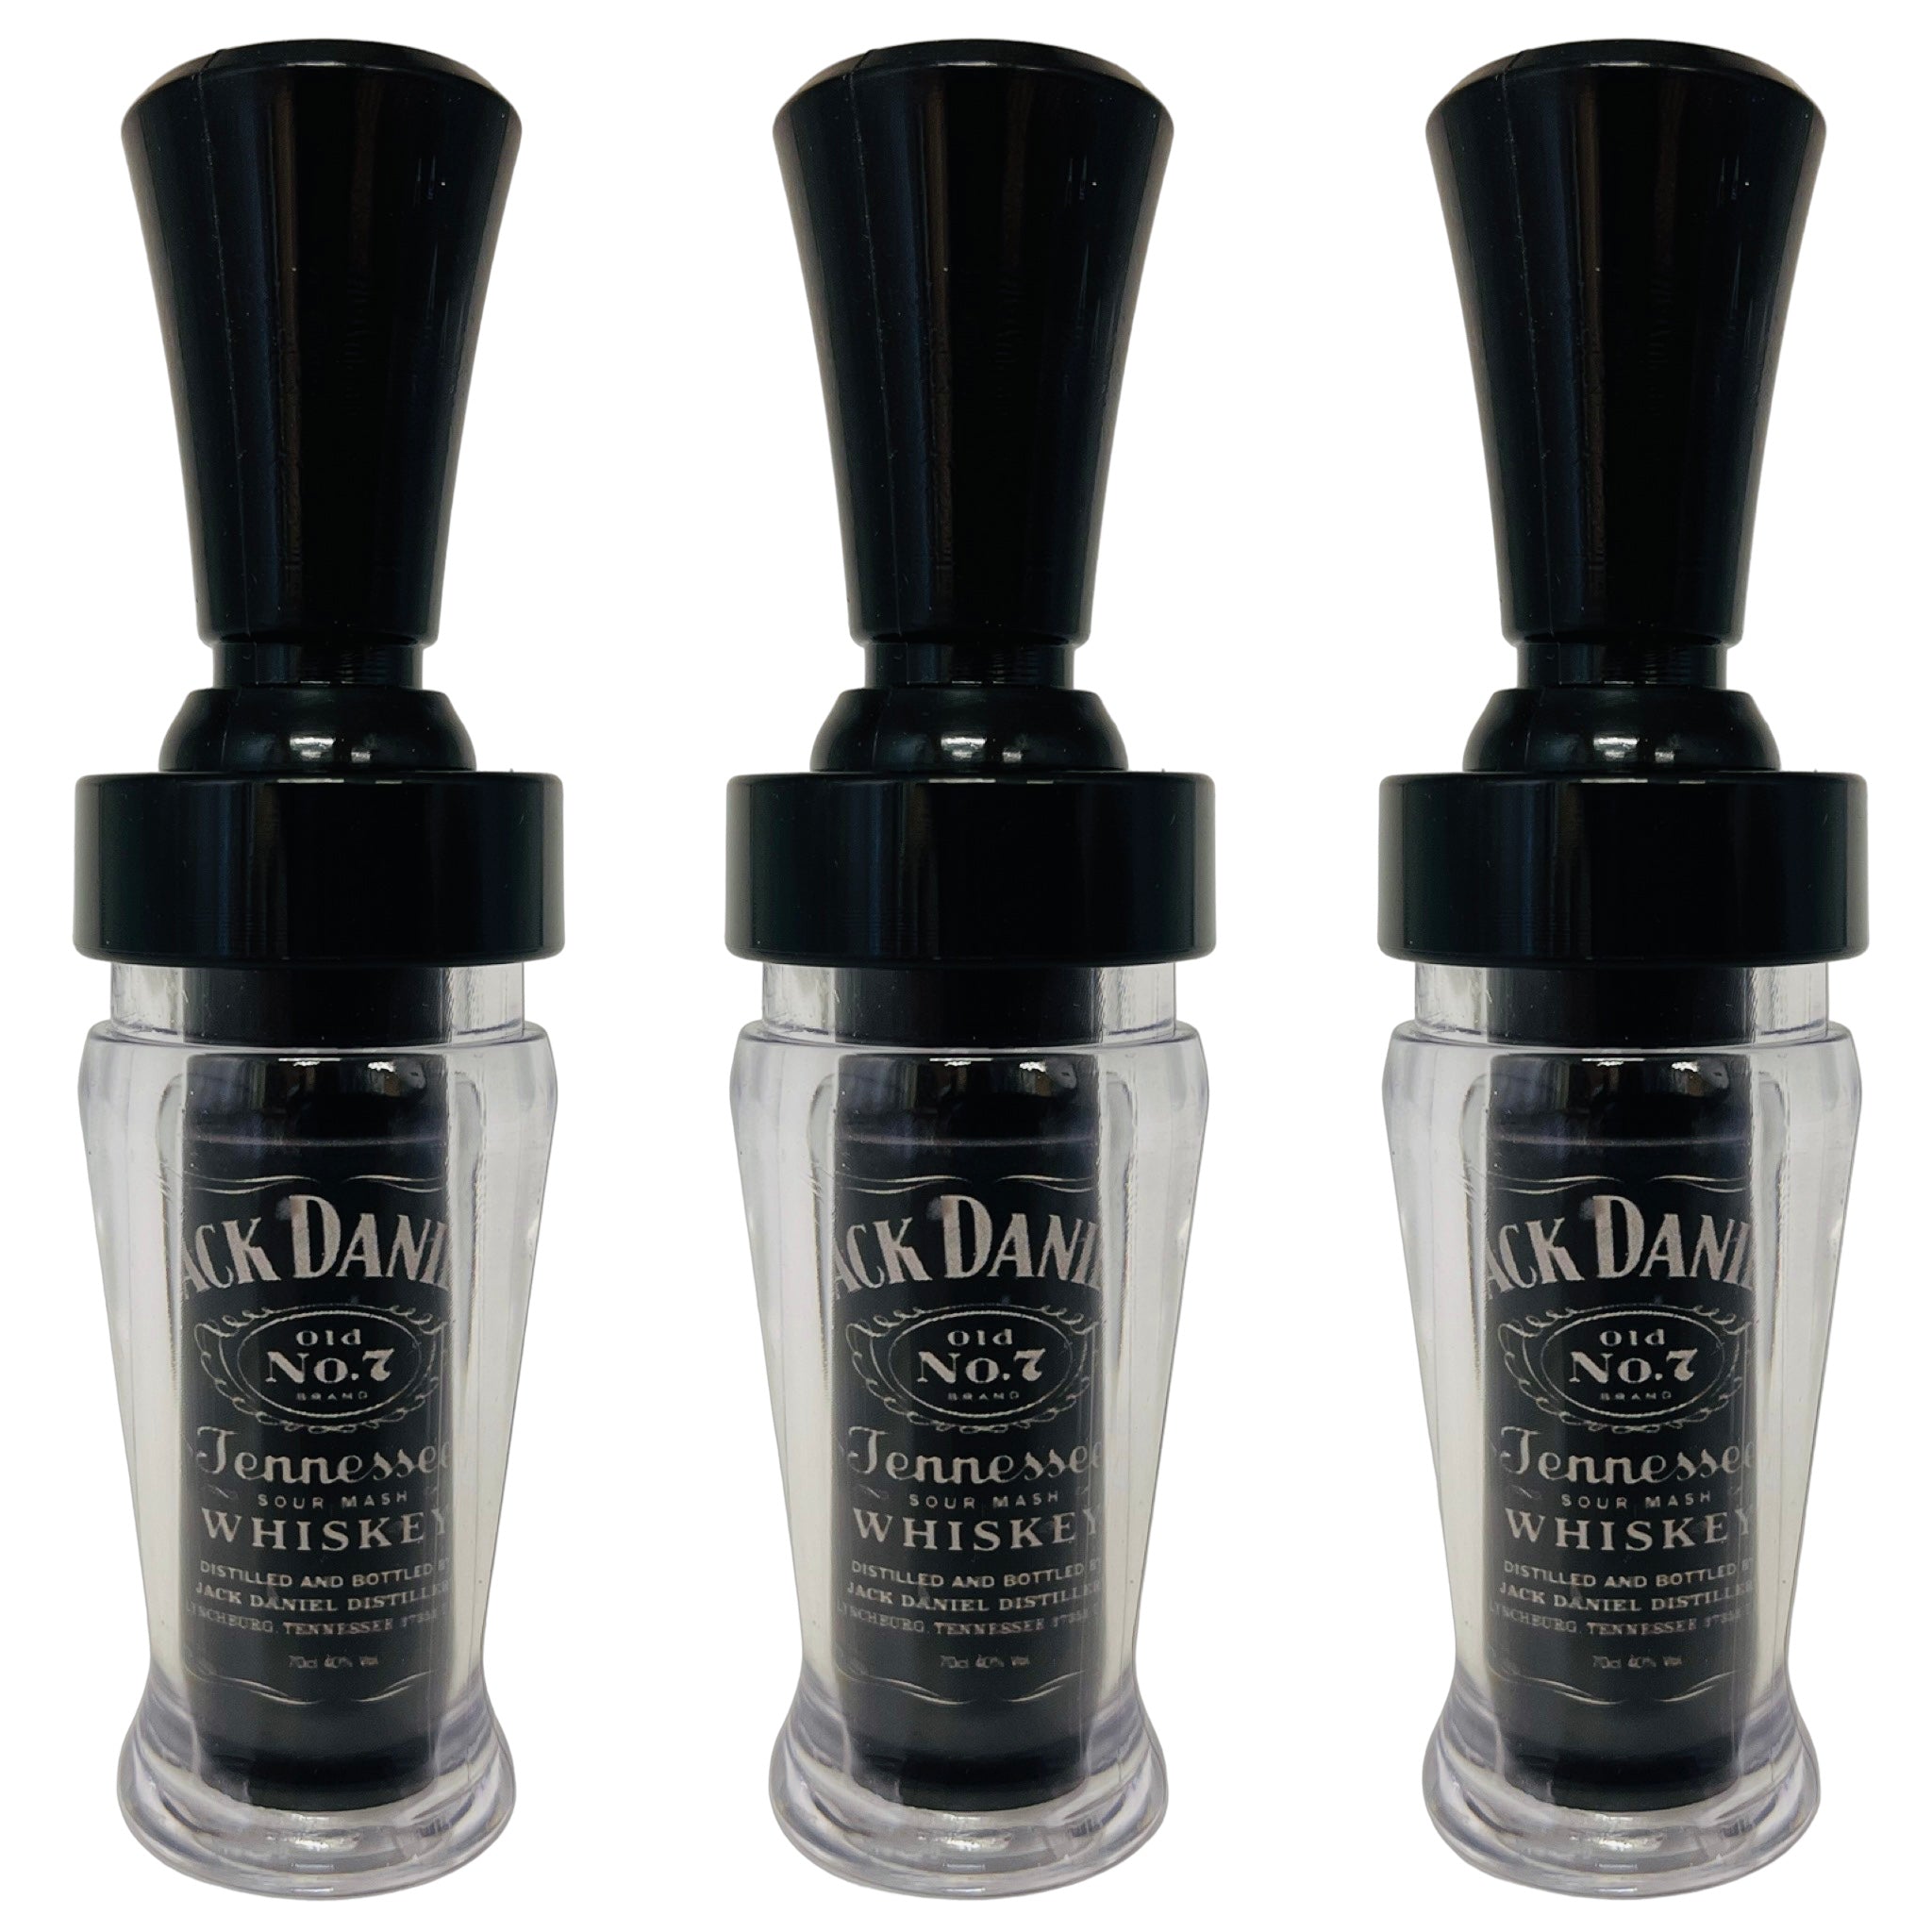 POLYCARBONATE IMAGE DUCK CALL JACK DANIELS - Iowa Hunting Products